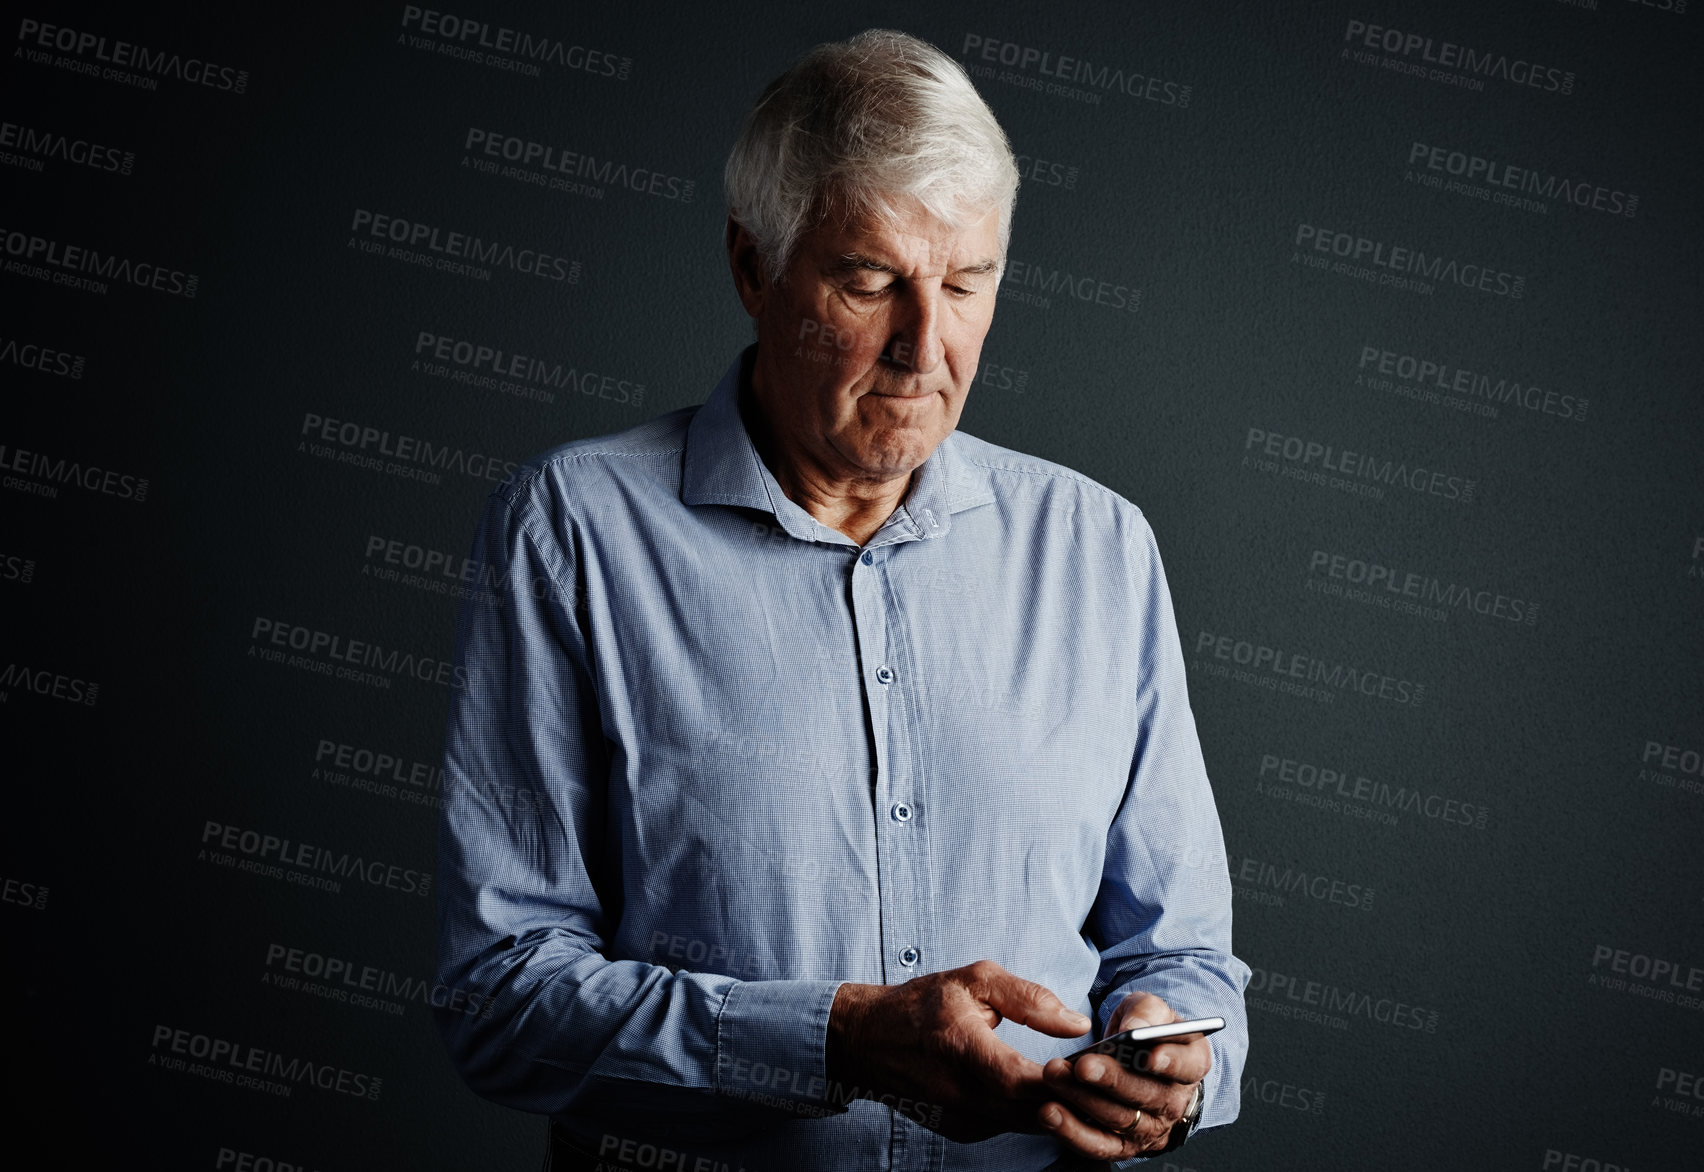 Buy stock photo Studio shot of a handsome mature man sending a text message against a dark background